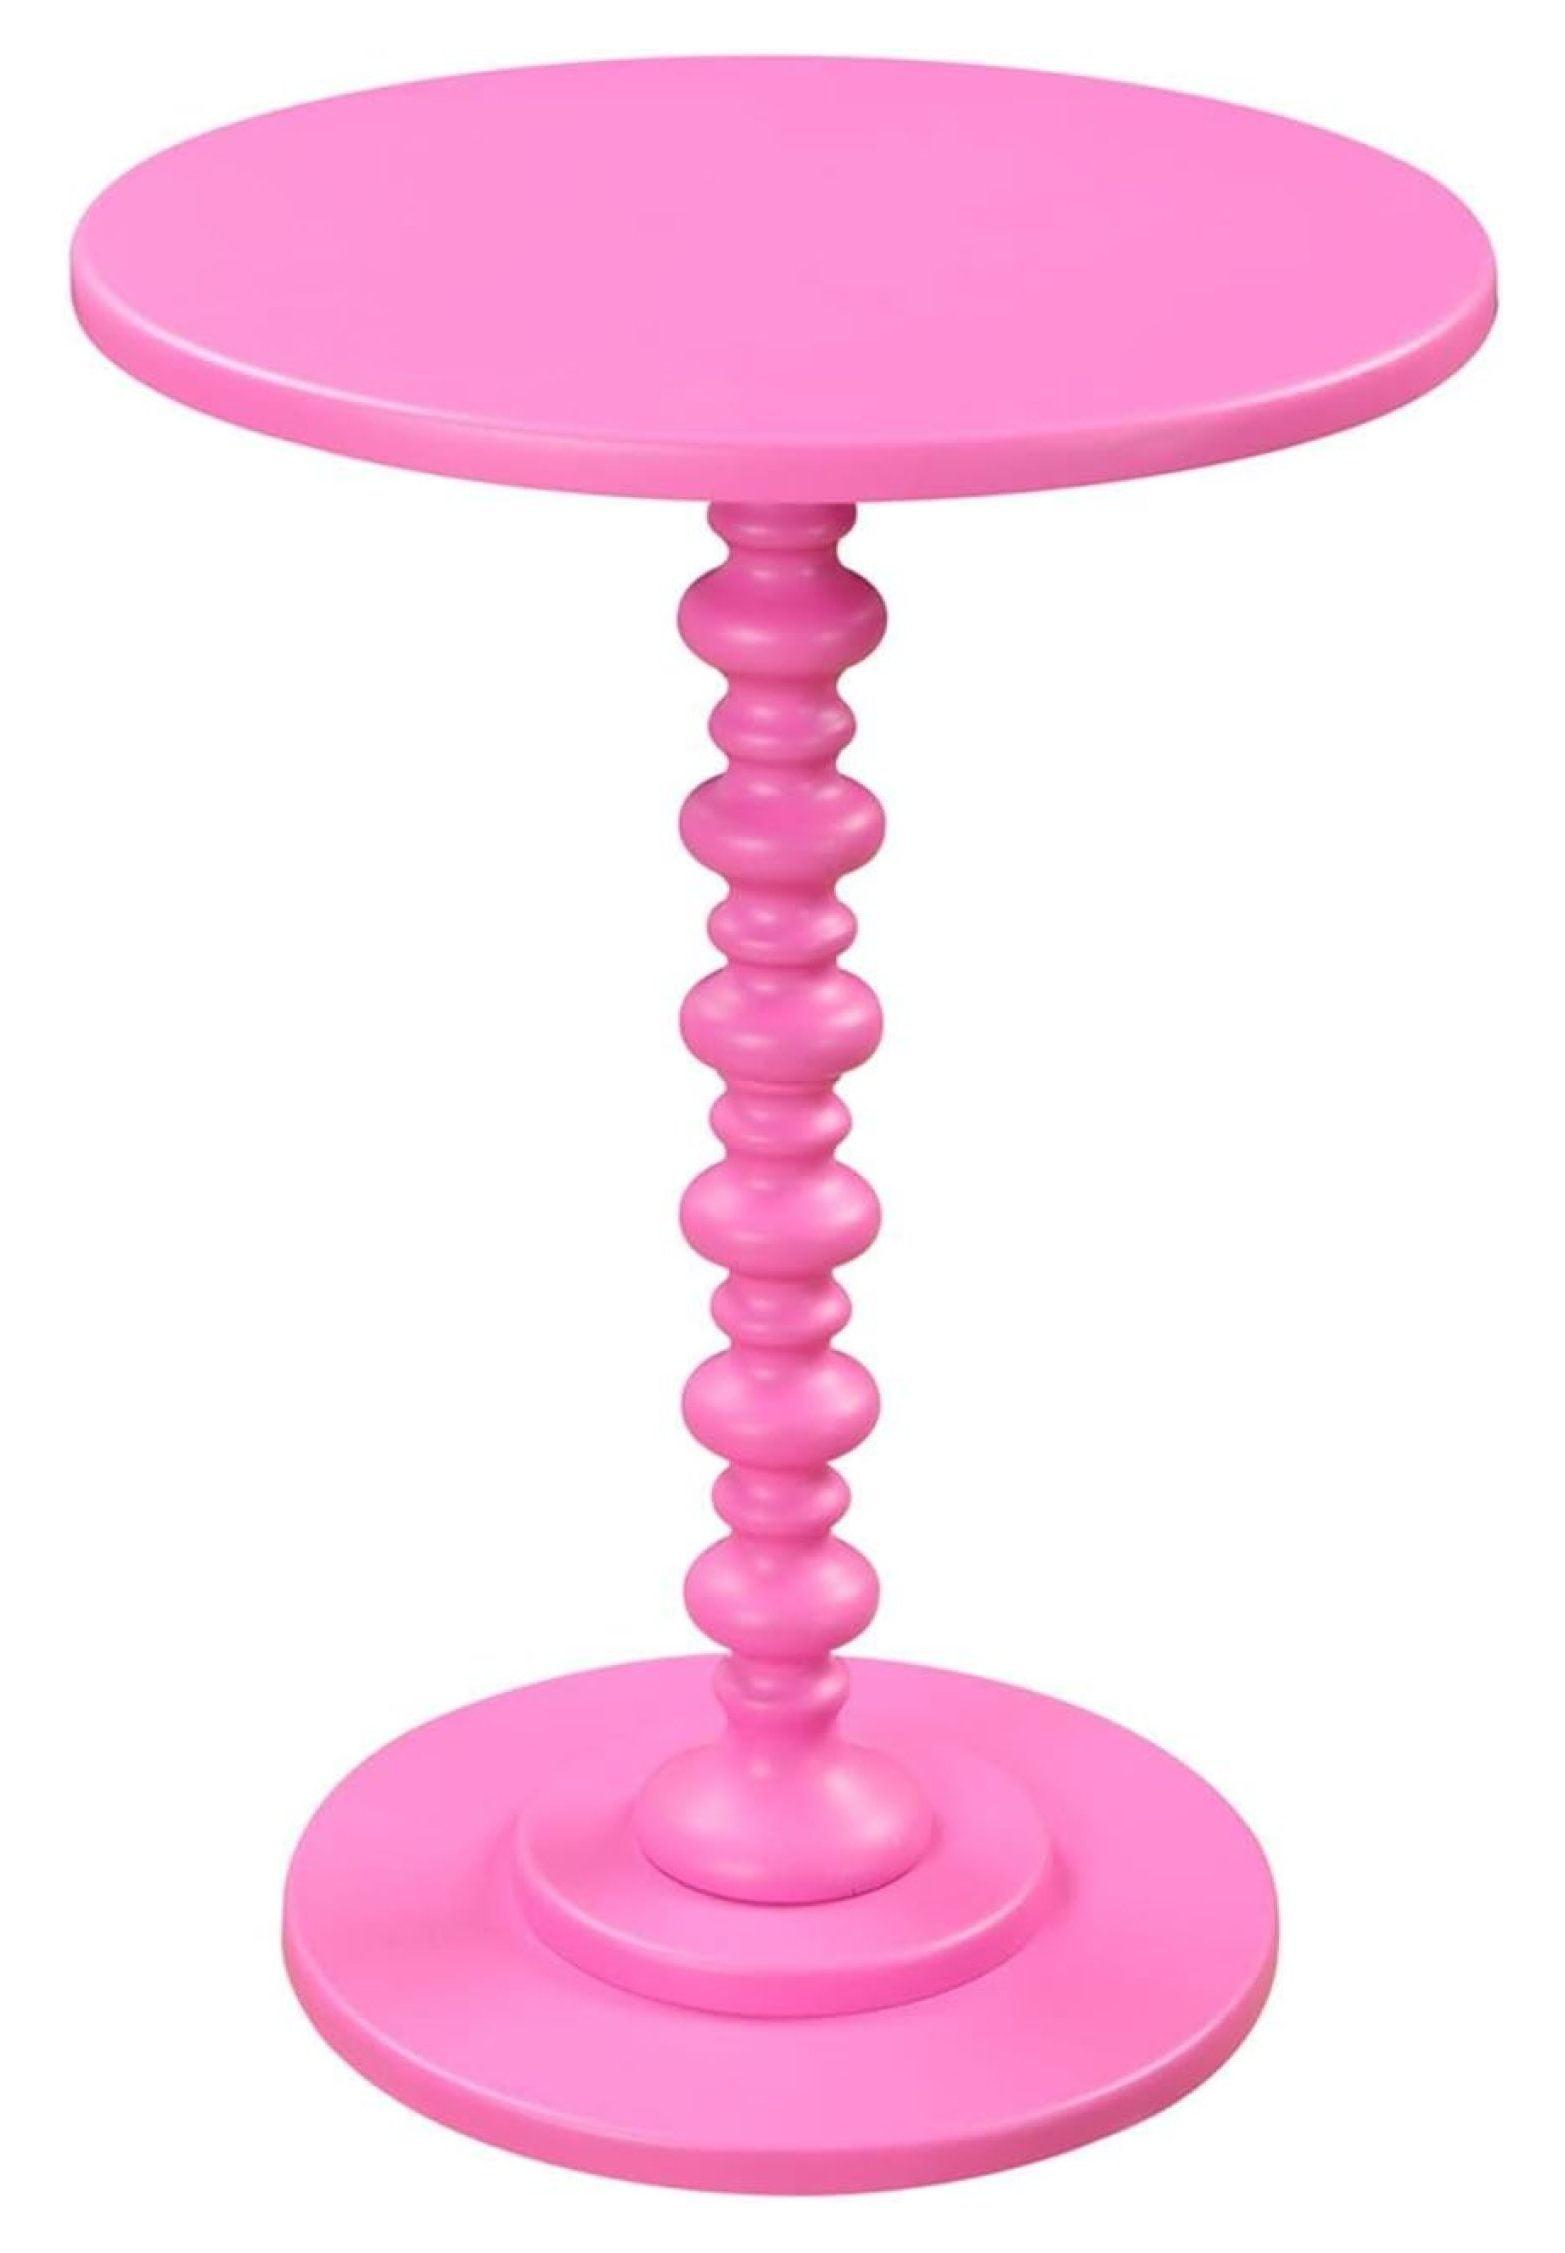 Palm Beach Glossy Pink Round Wood Spindle Side Table